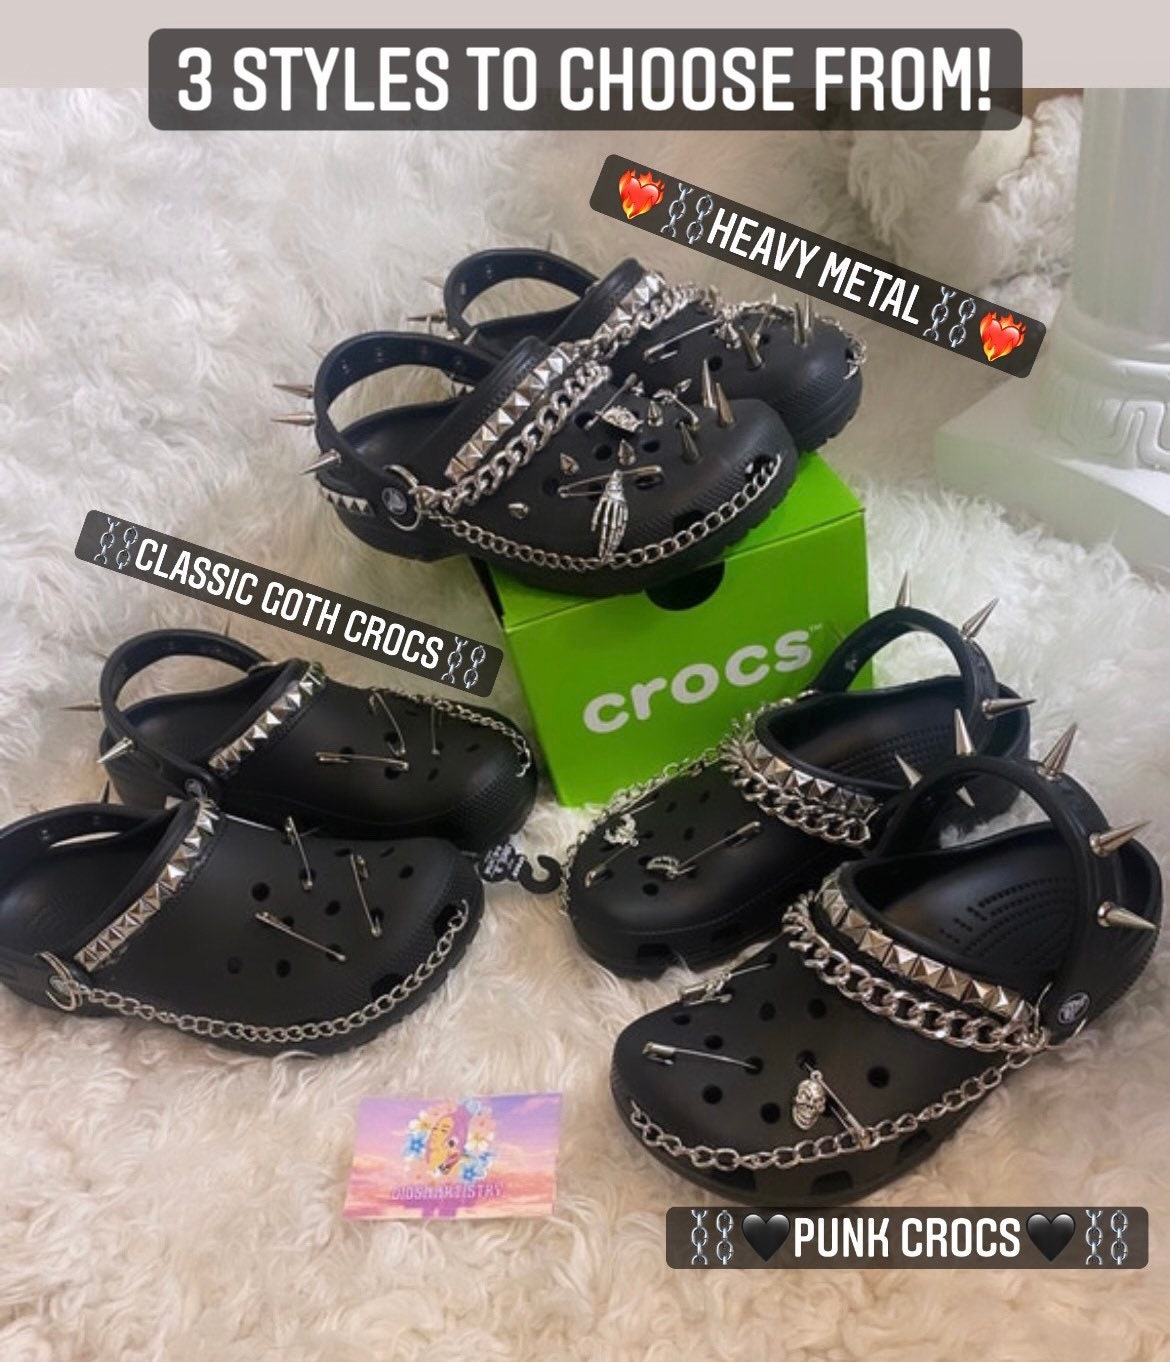 You Can Now Buy 'Goth Crocs' With Spikes And Chains - LADbible